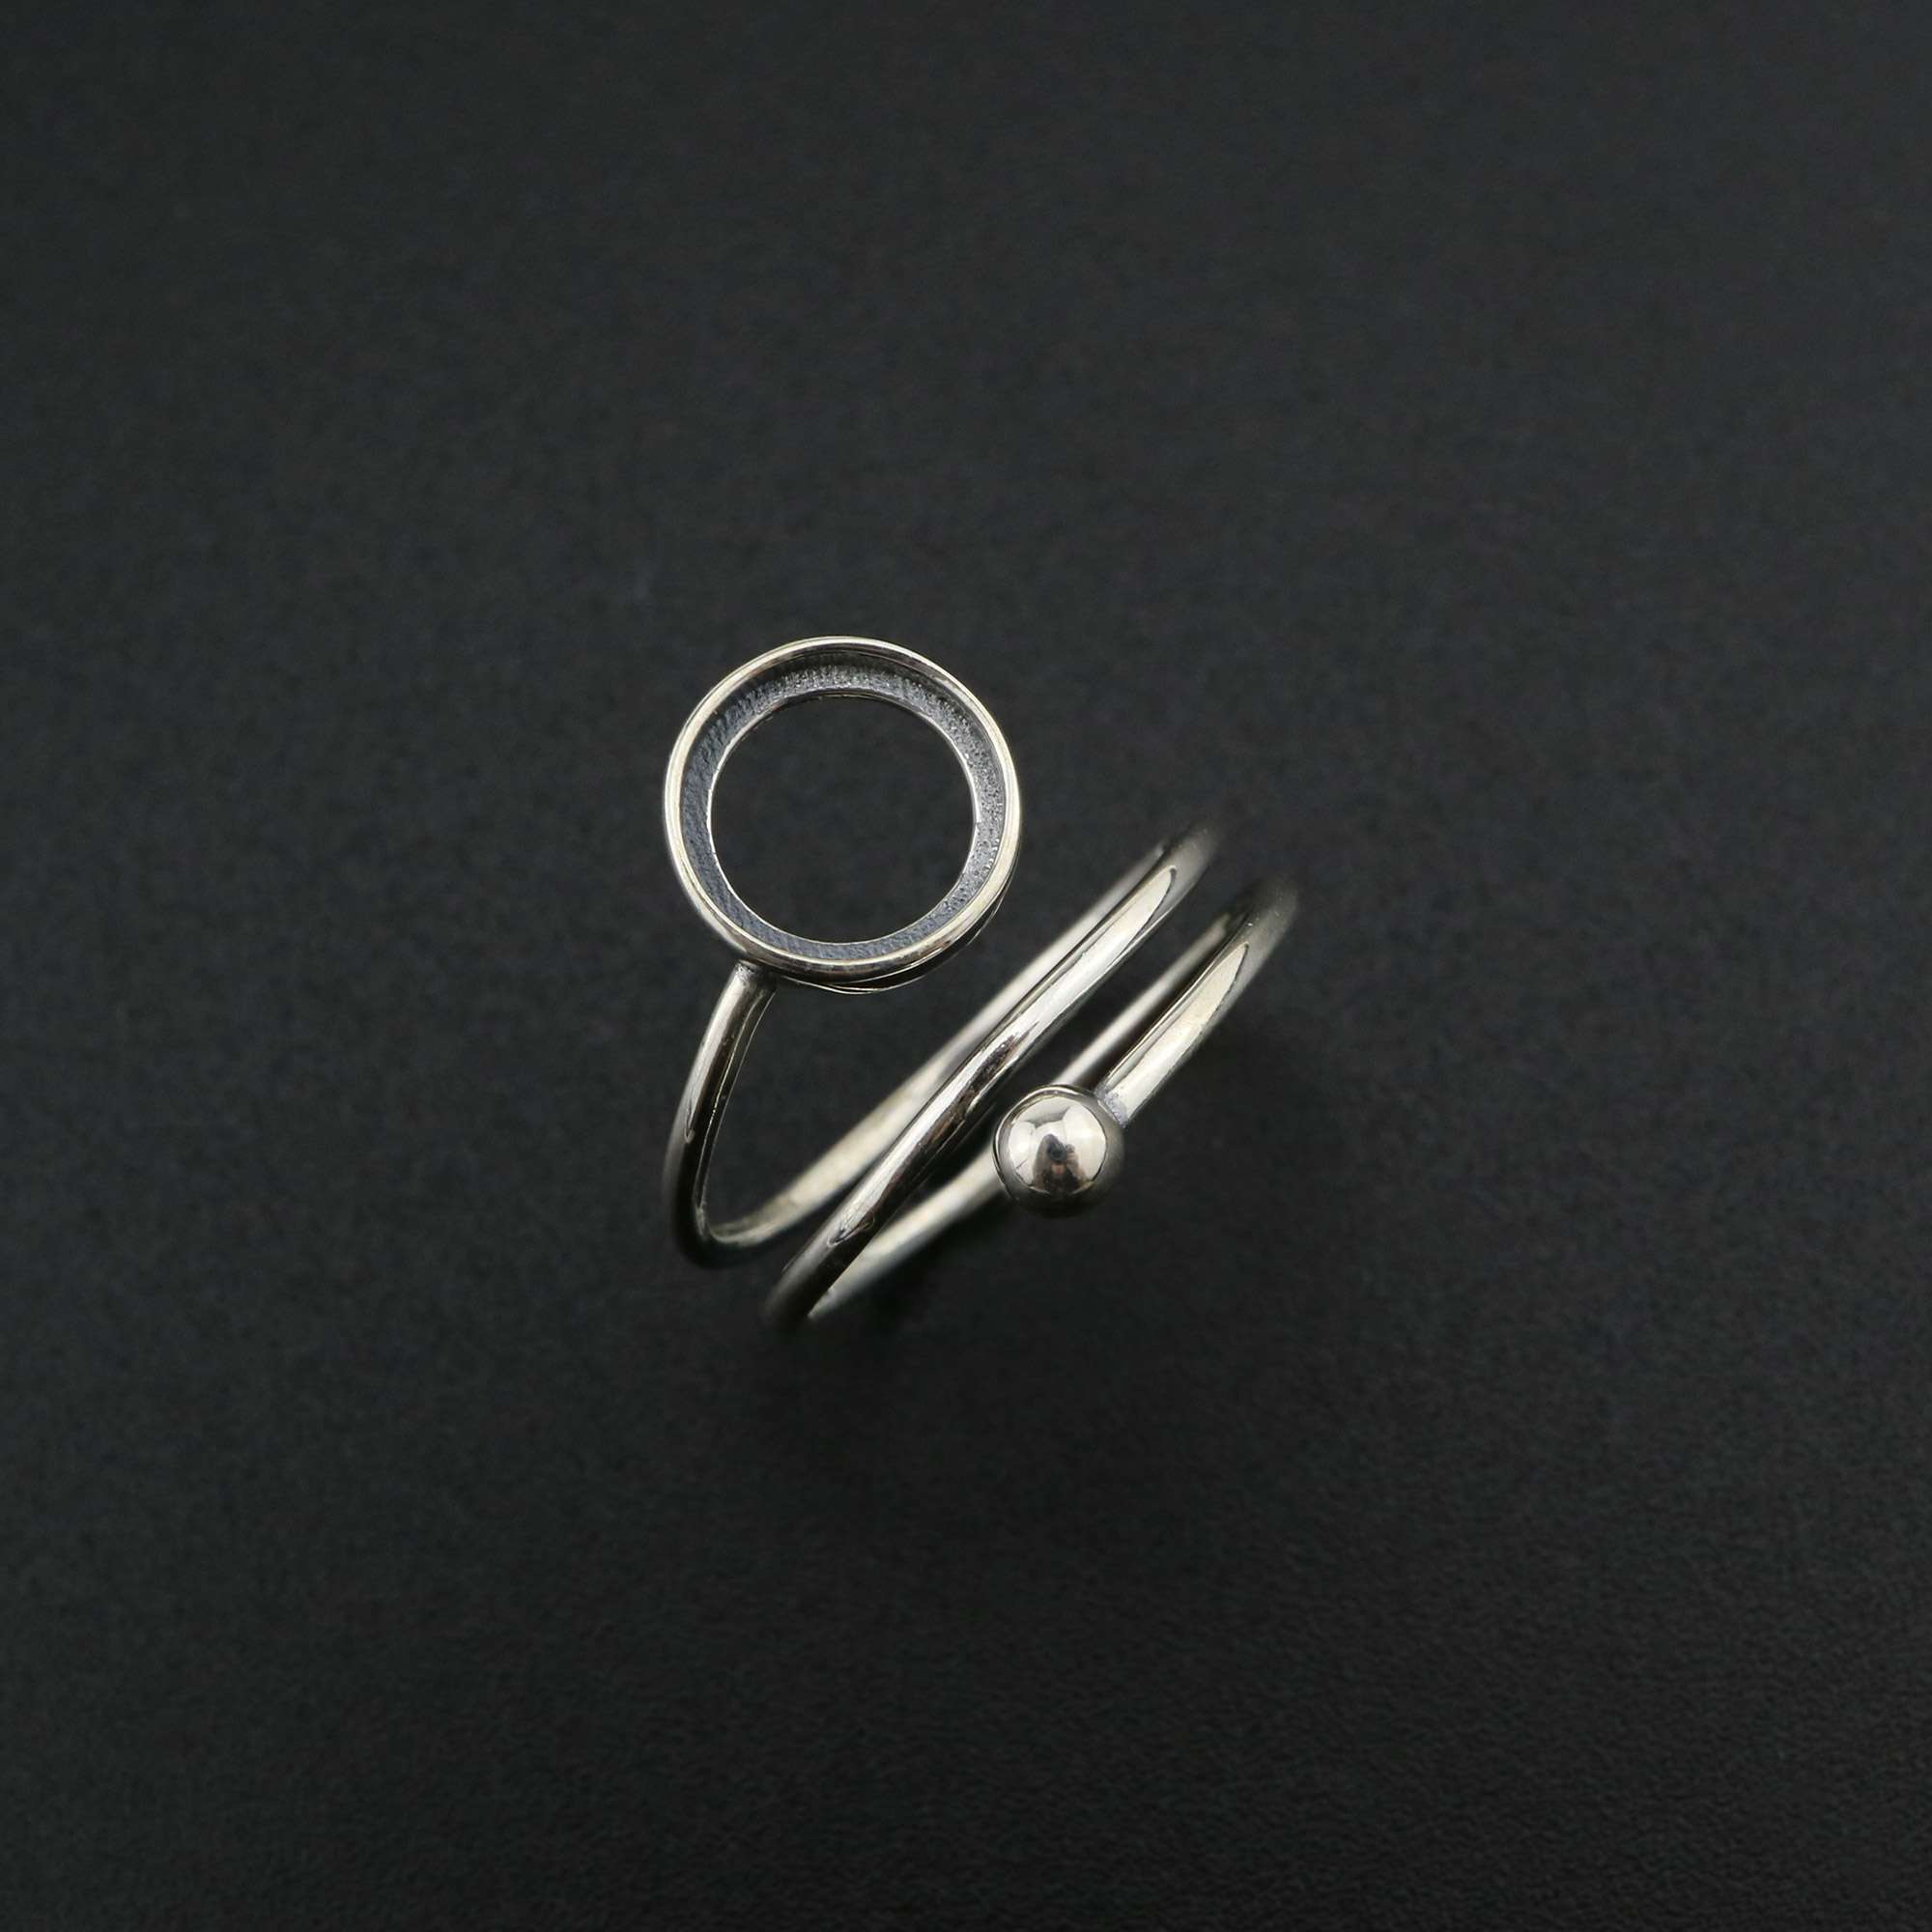 1Pcs 8MM Round Ring Settings US Size 6 for Cabochon Stone Solid 925 Sterling Silver DIY Bezel Tray Supplies 1212067 - Click Image to Close